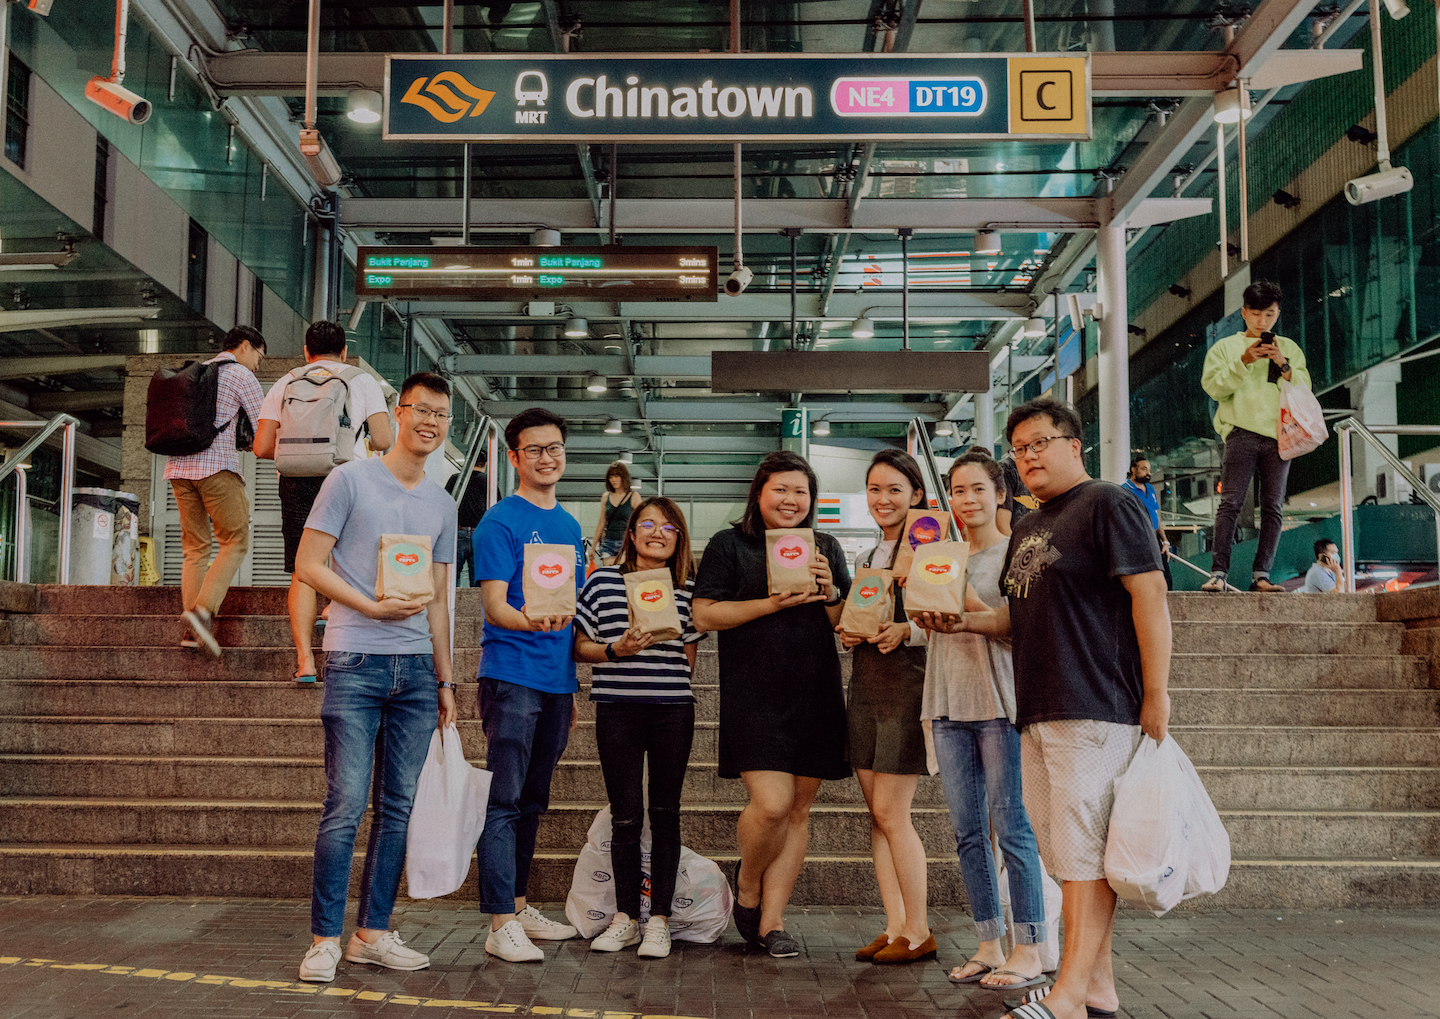 "There is actually so much more we can do for our community and they can really just be simple but thoughtful actions," says Abigail Tang (second from right), pictured here with her cell group heading to Chinatown to distribute the care packs.